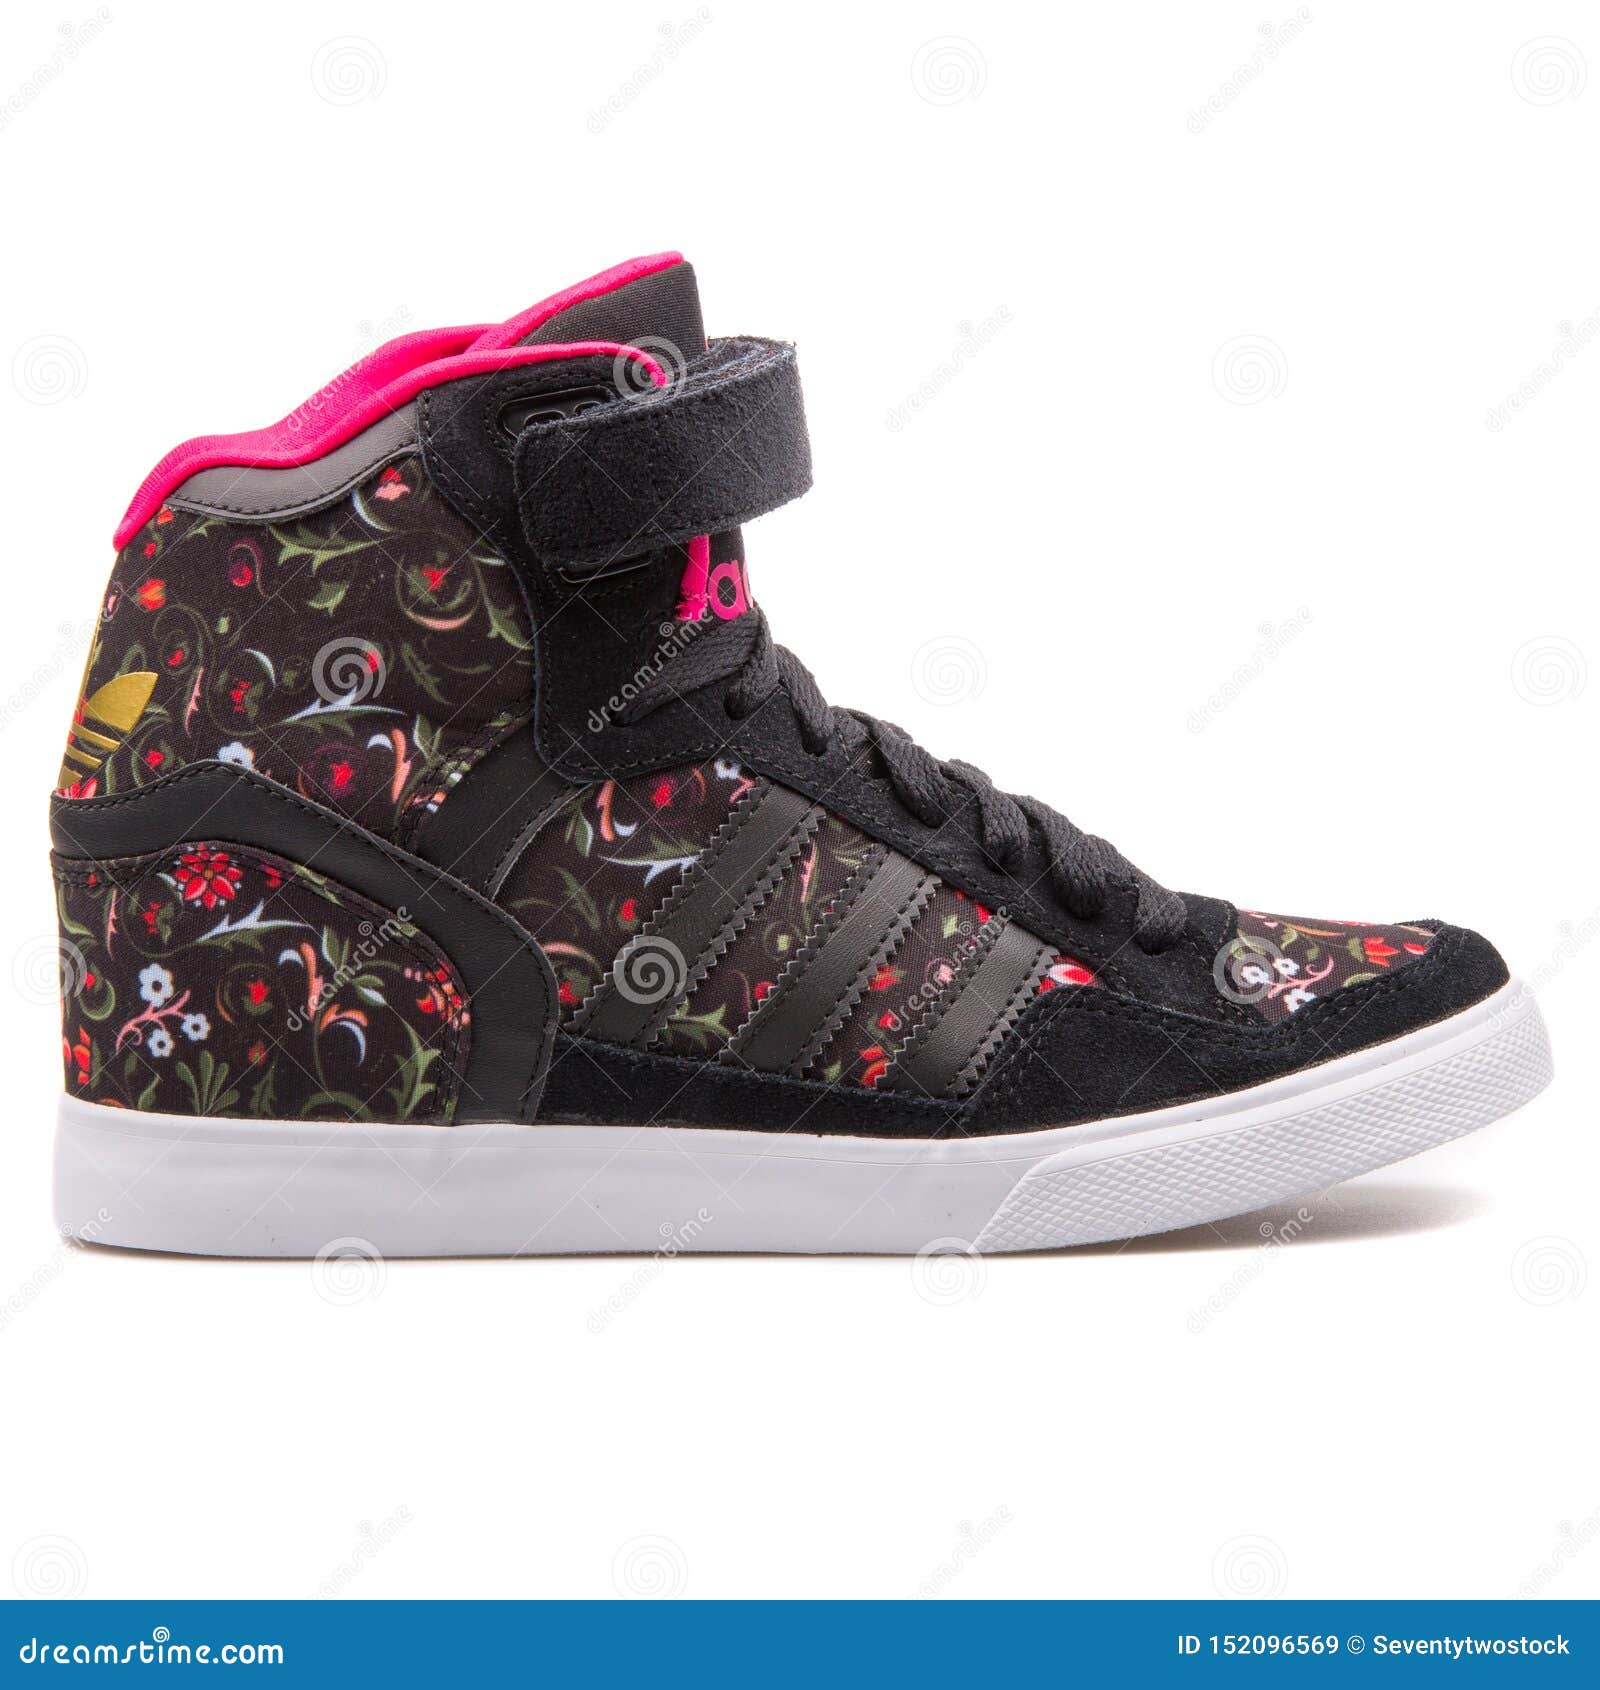 Adidas Extaball Up Floral and Multi Color Sneaker Image - of shoes, casual: 152096569